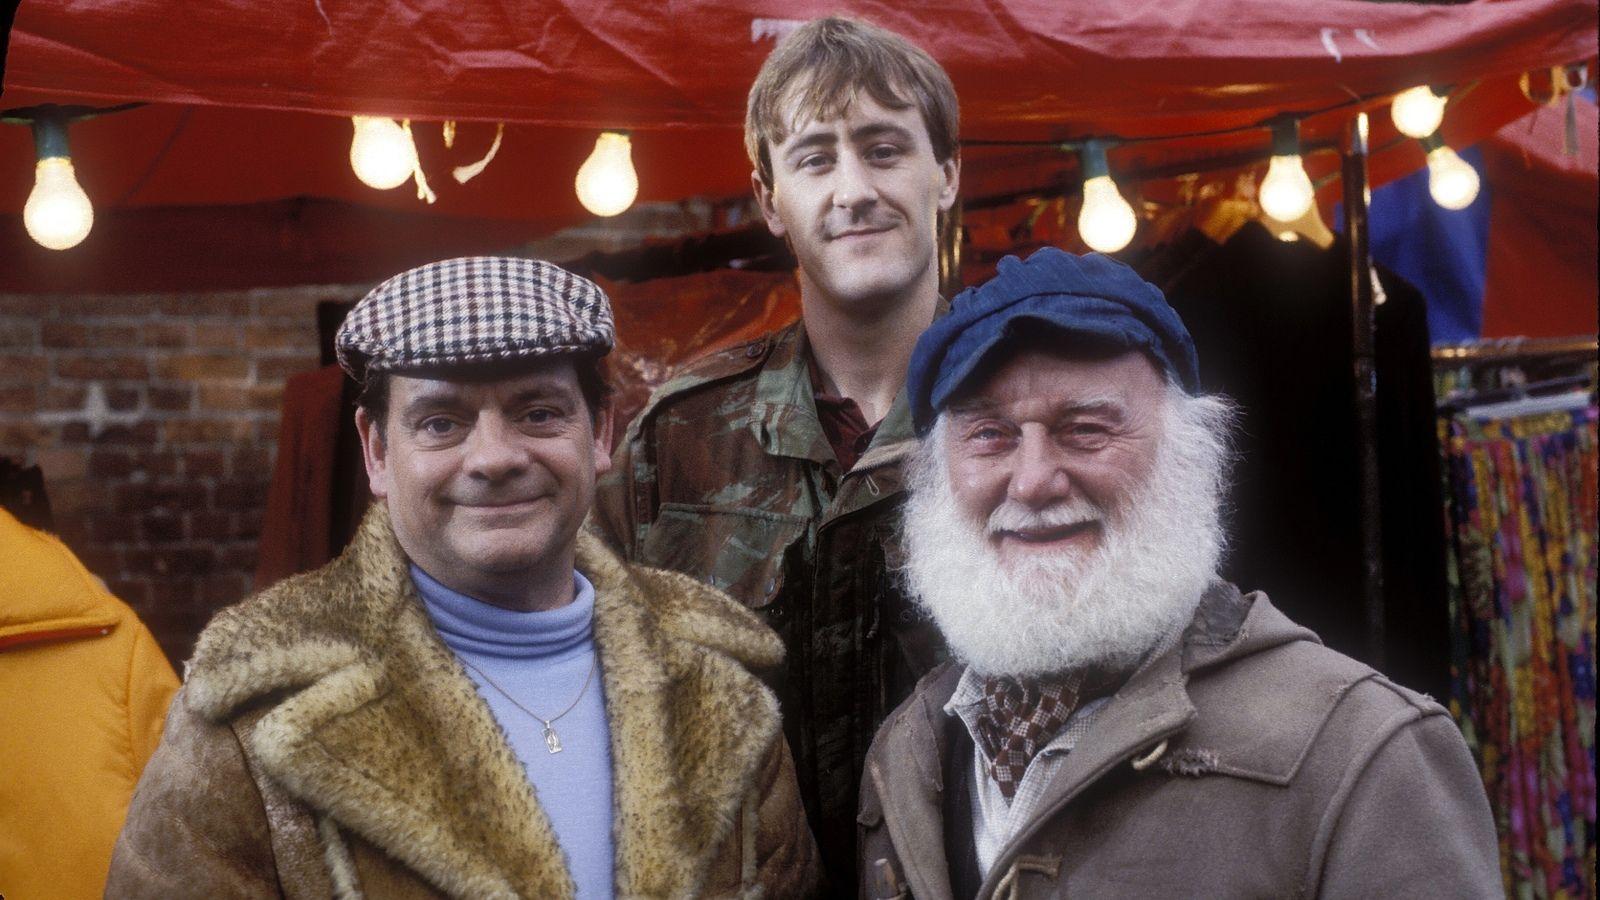 A Lost Episode Of 'Only Fools And Horses' Has Been Found On A Dusty